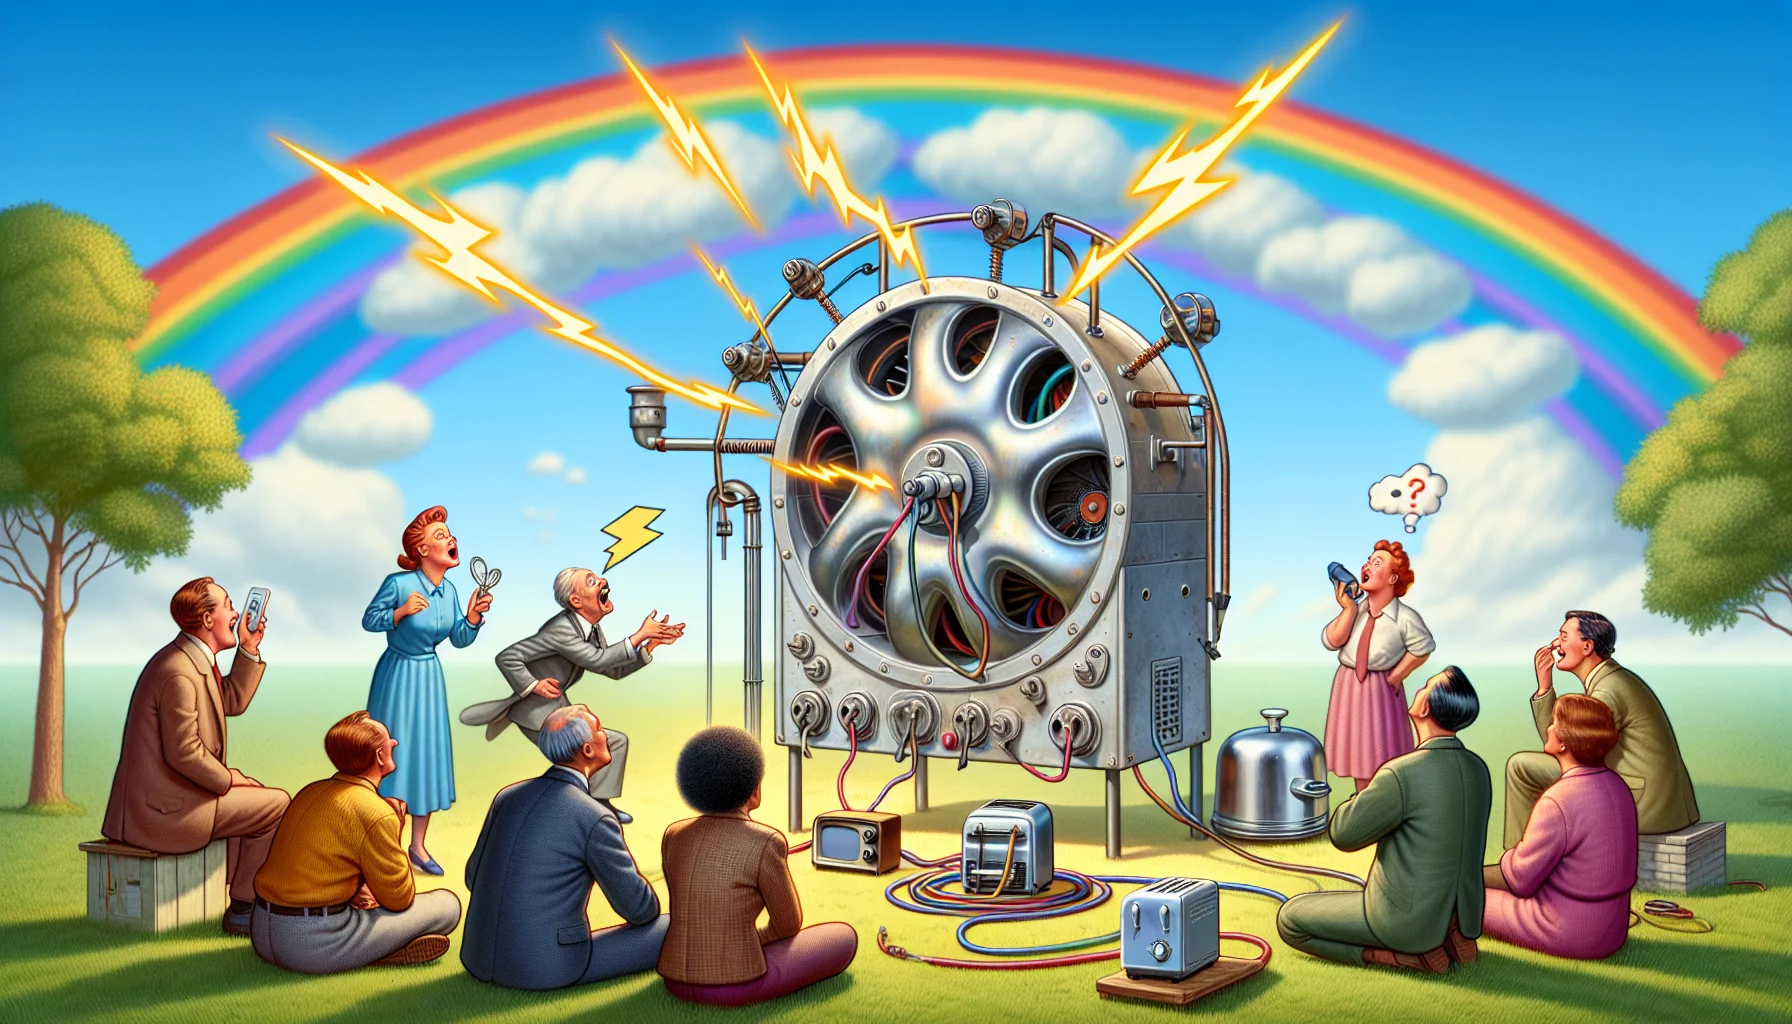 Create a humorous and tempting scenario set on a sunny day. In this scene, there is a piece of remarkable technology known as the 'WEN Filter'. This metallic device, round in shape with multiple outlets, is mid-action generating an electric bolt. It is situated on the grass with a rainbow overhead and has wired connection to scattered household appliances such as a fridge, toaster, and television. People of diverse races and genders are looking at the spectacle with a mix of awe and amusement, their expressions lively and full of excitement. Their speech bubbles indicate they are discussing how they can generate their own electricity using this device.